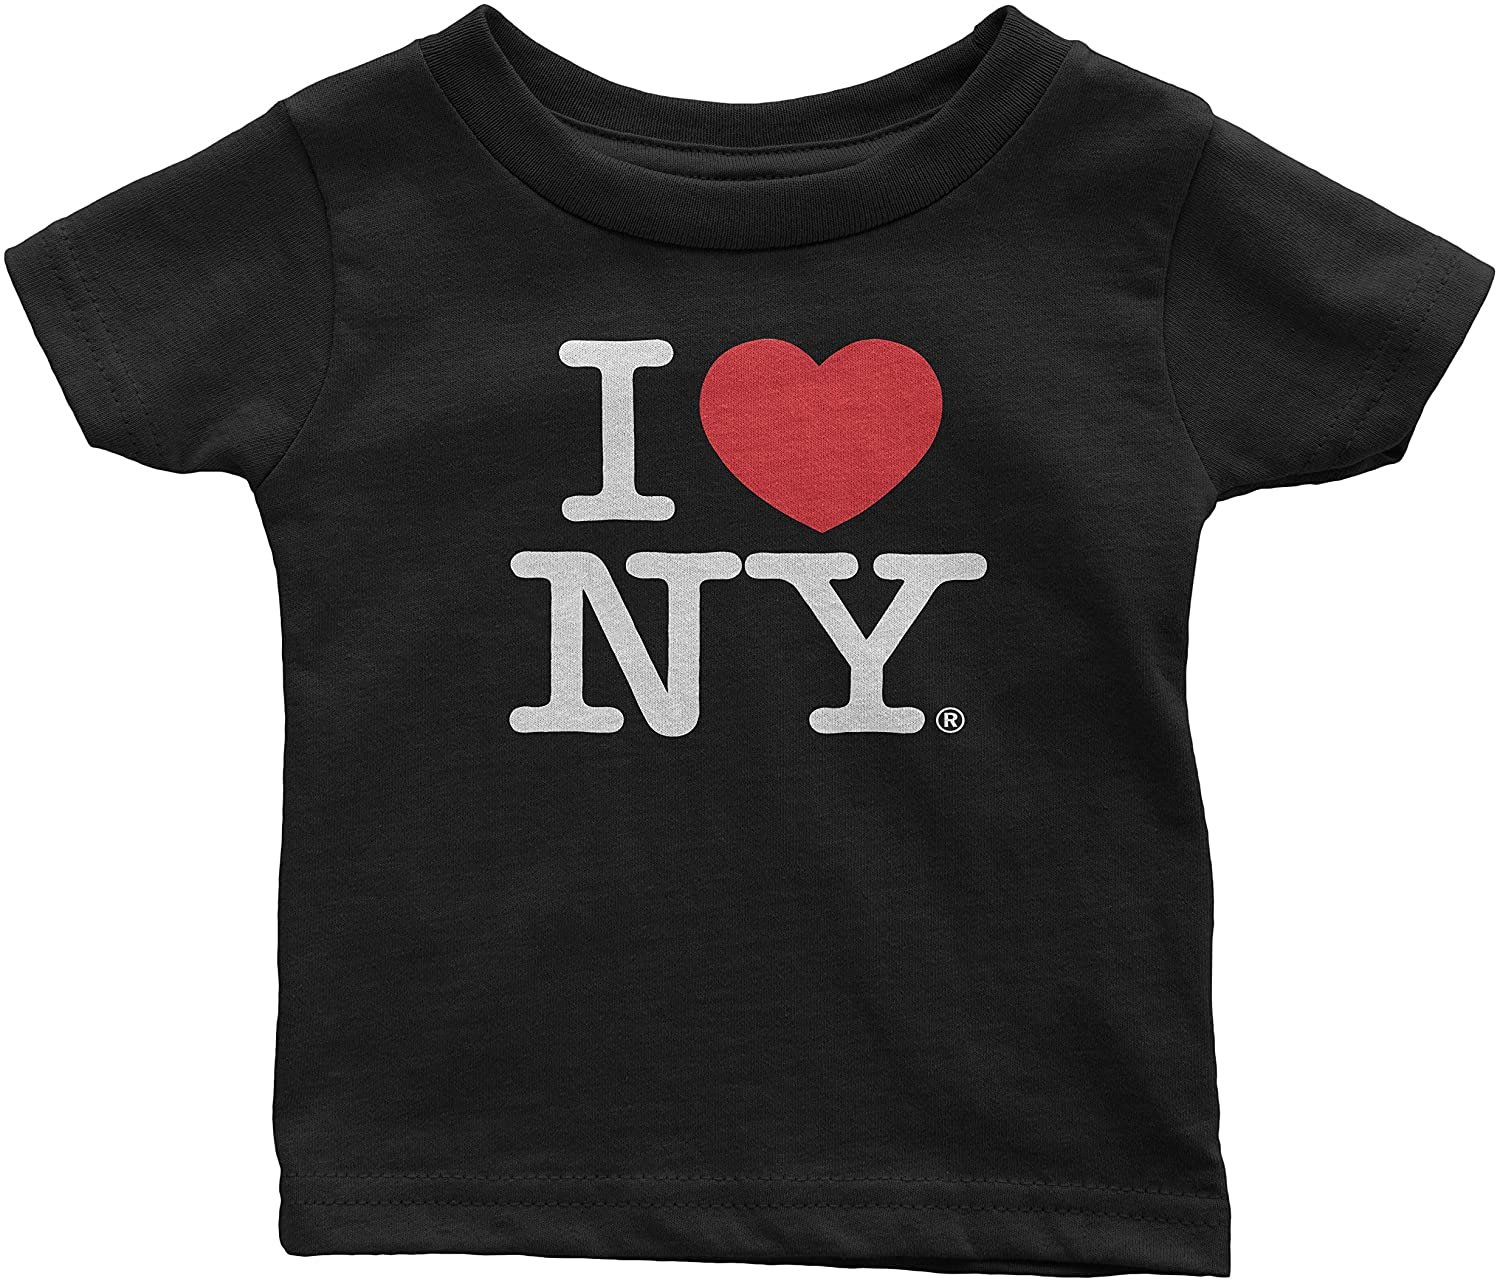 I Love NY Baby Tee Infant T-Shirt Officially Licensed T-Shirt New York ...